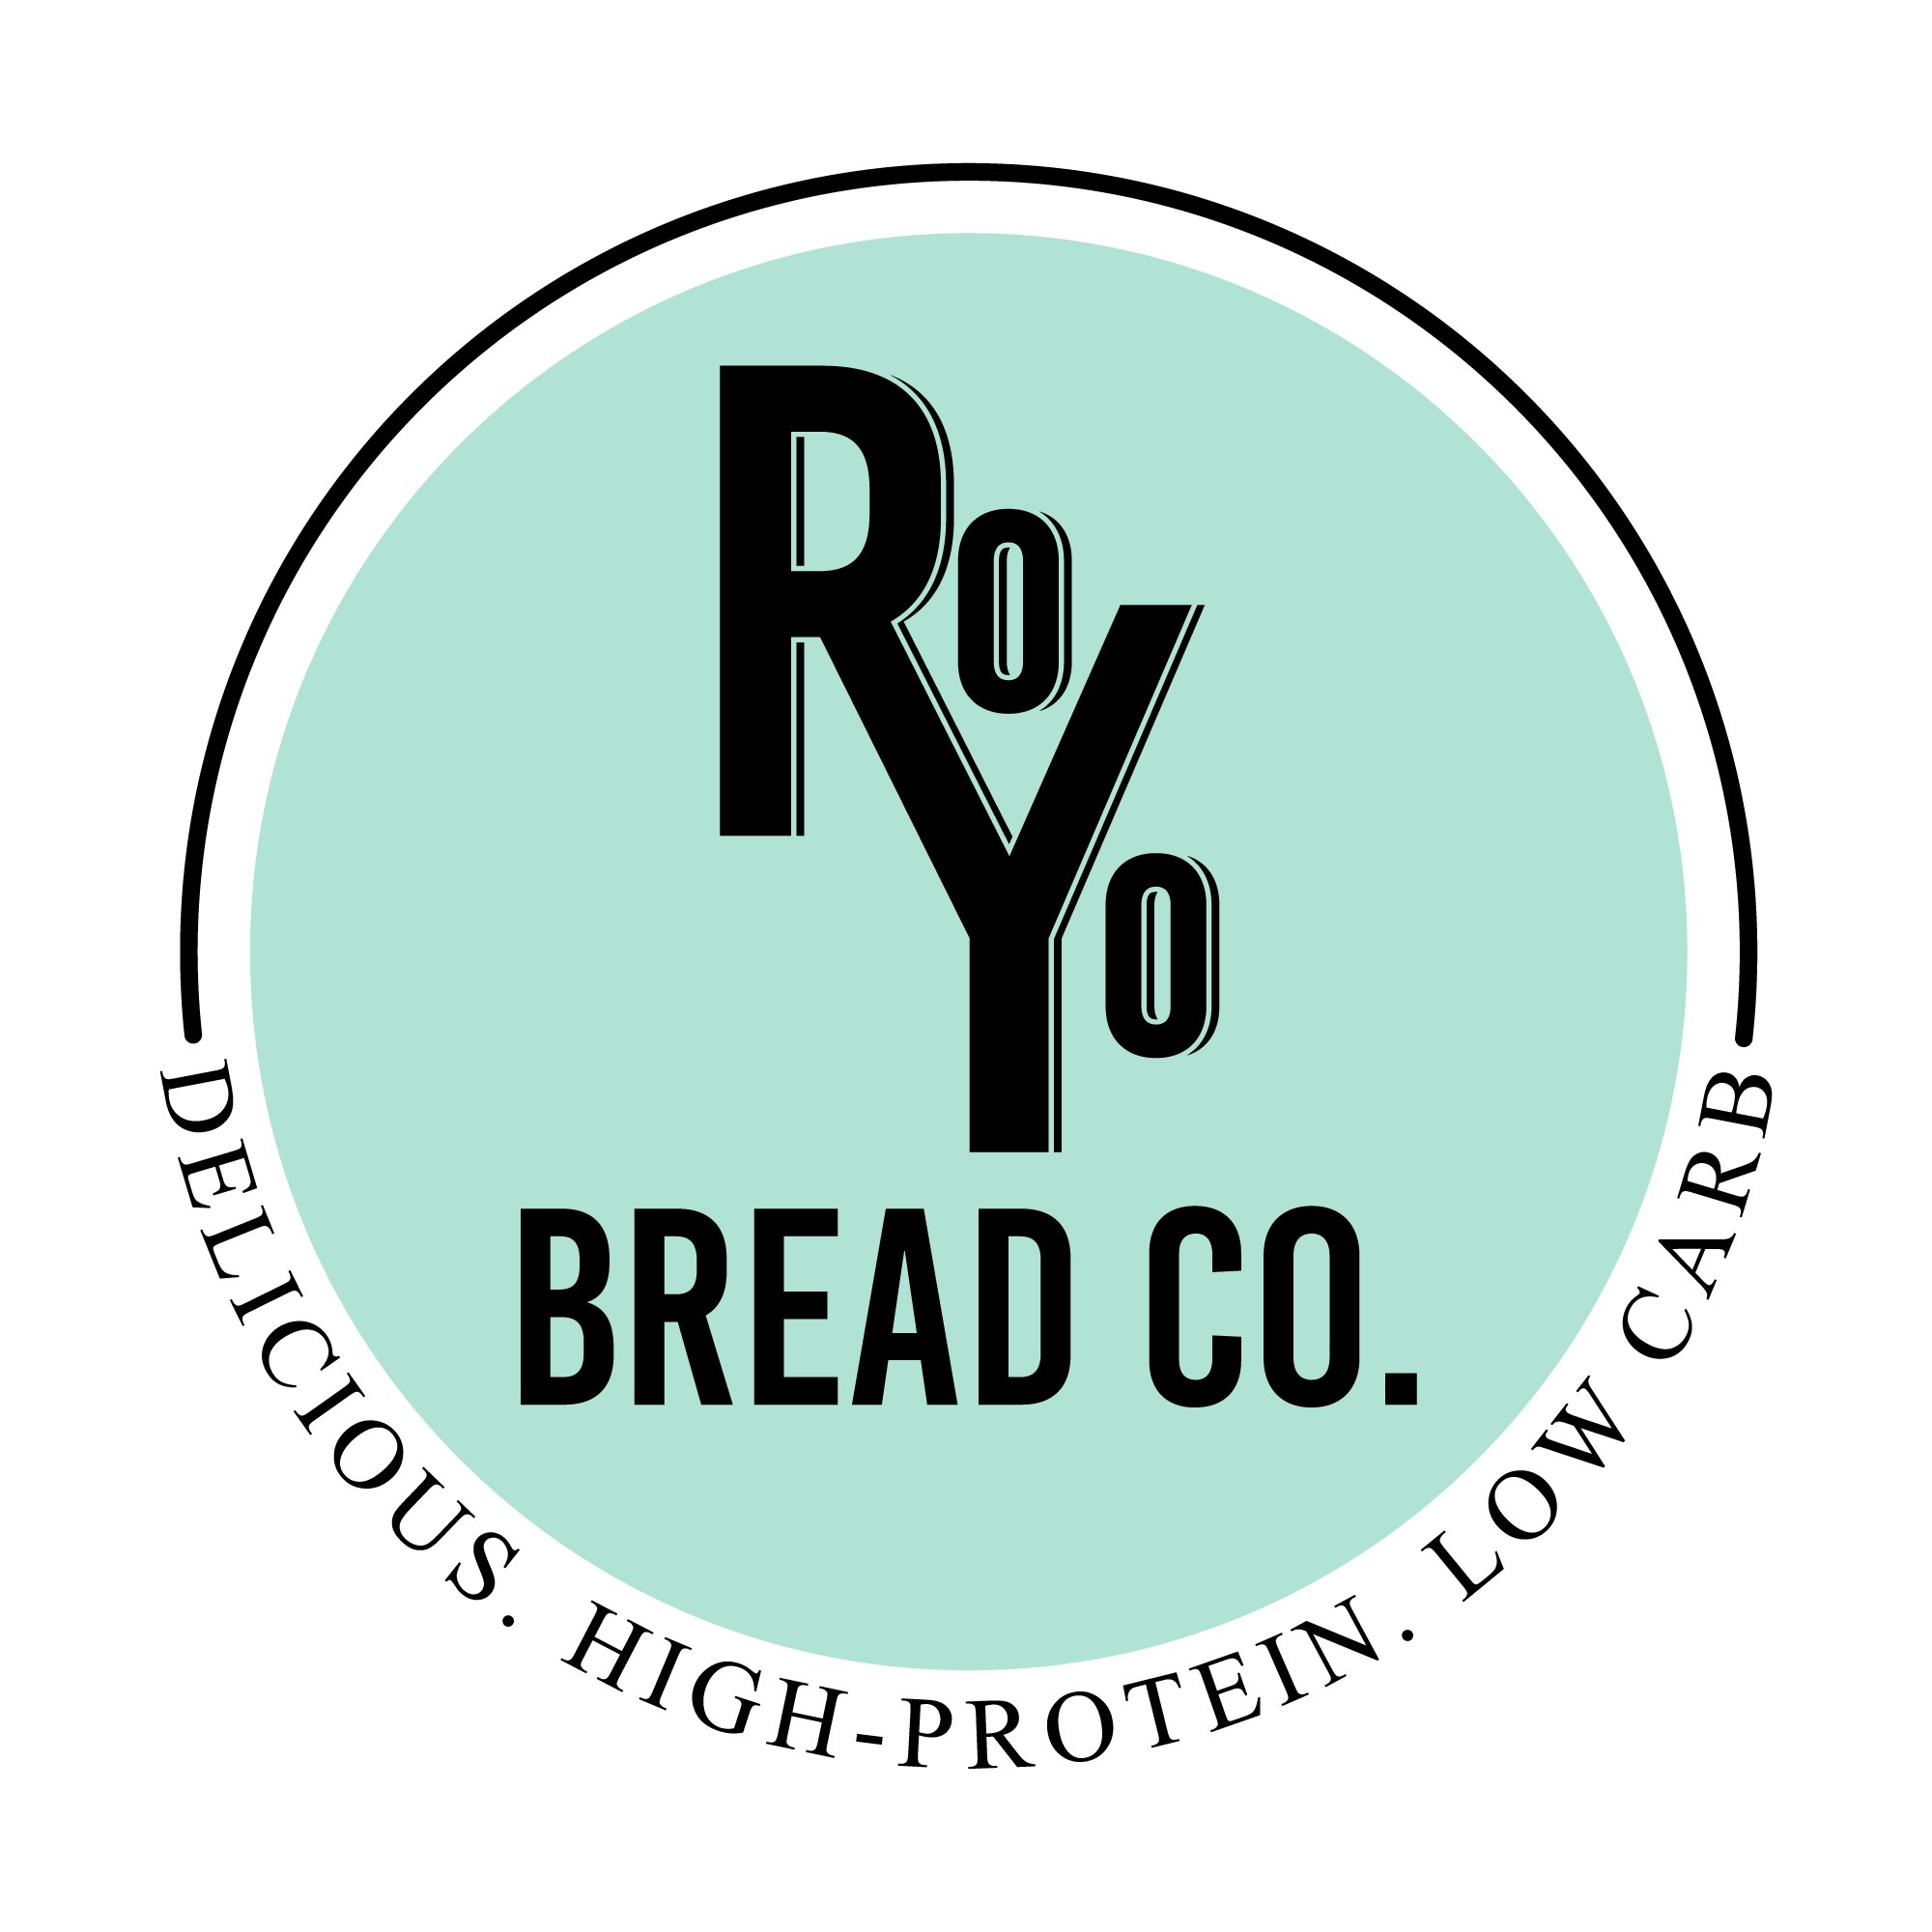 RoYo Bread defies expectations with ingredients aimed to benefit the human body